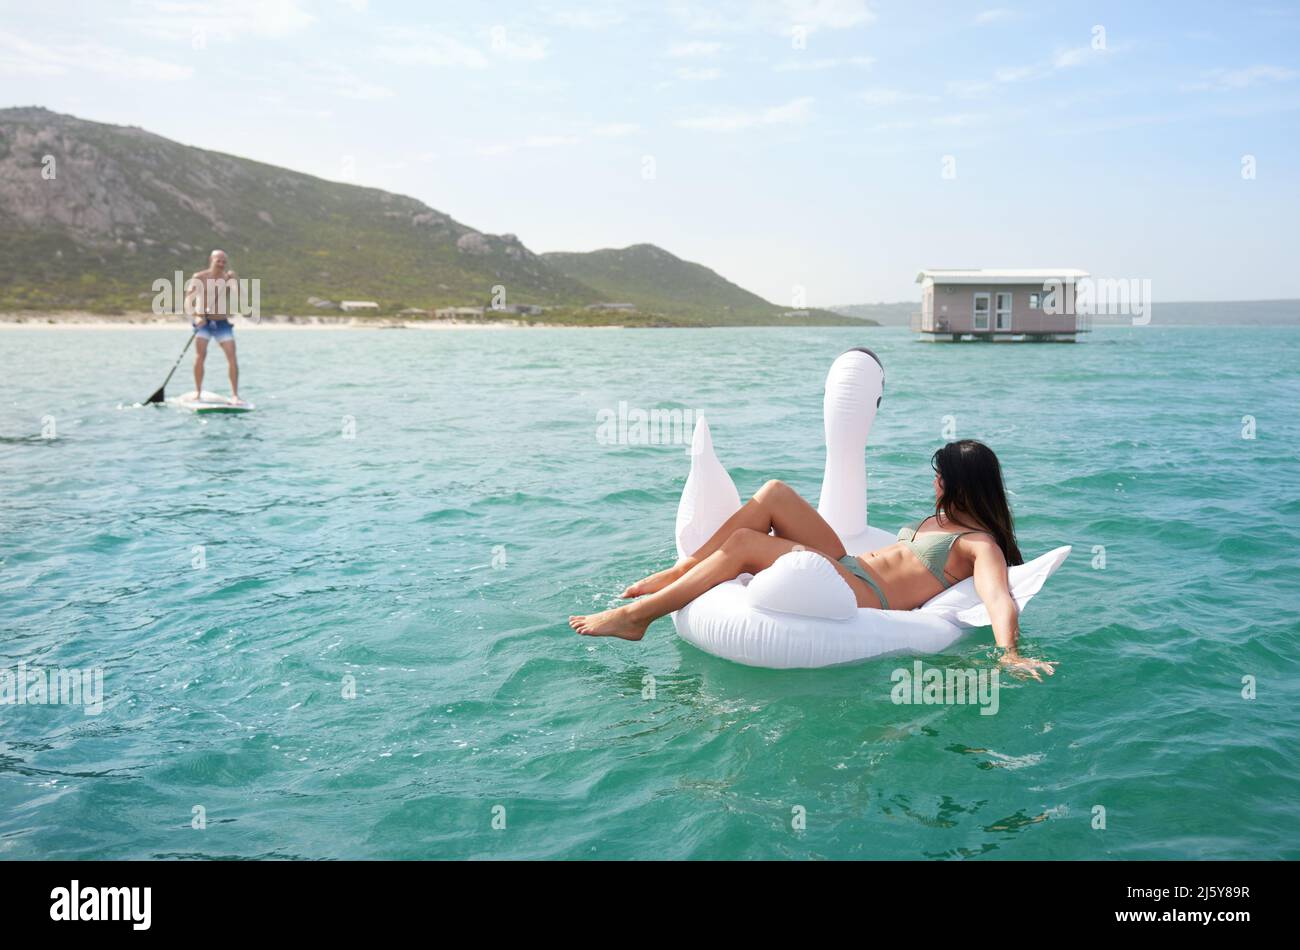 Couple on inflatable swan and paddle board on summer ocean Stock Photo